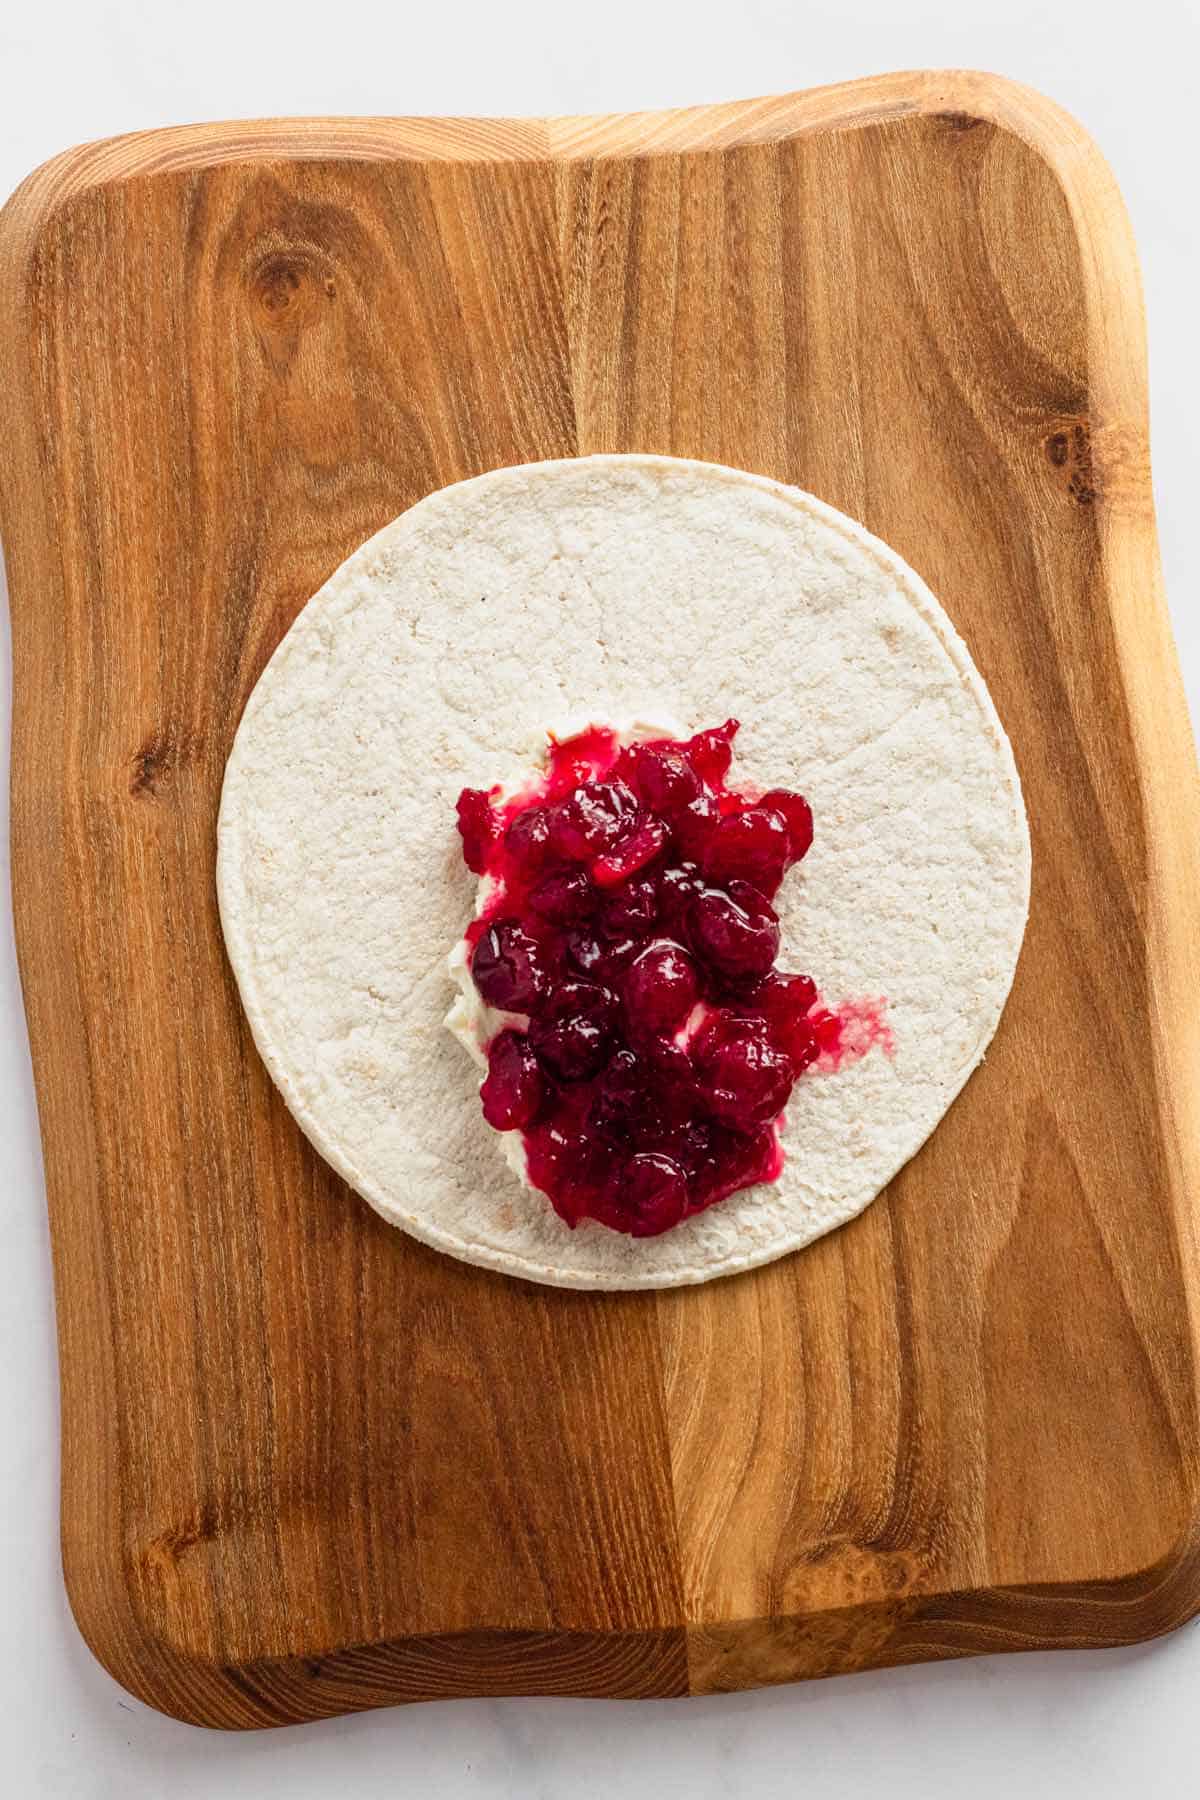 cream cheese topped with cranberry sauce.